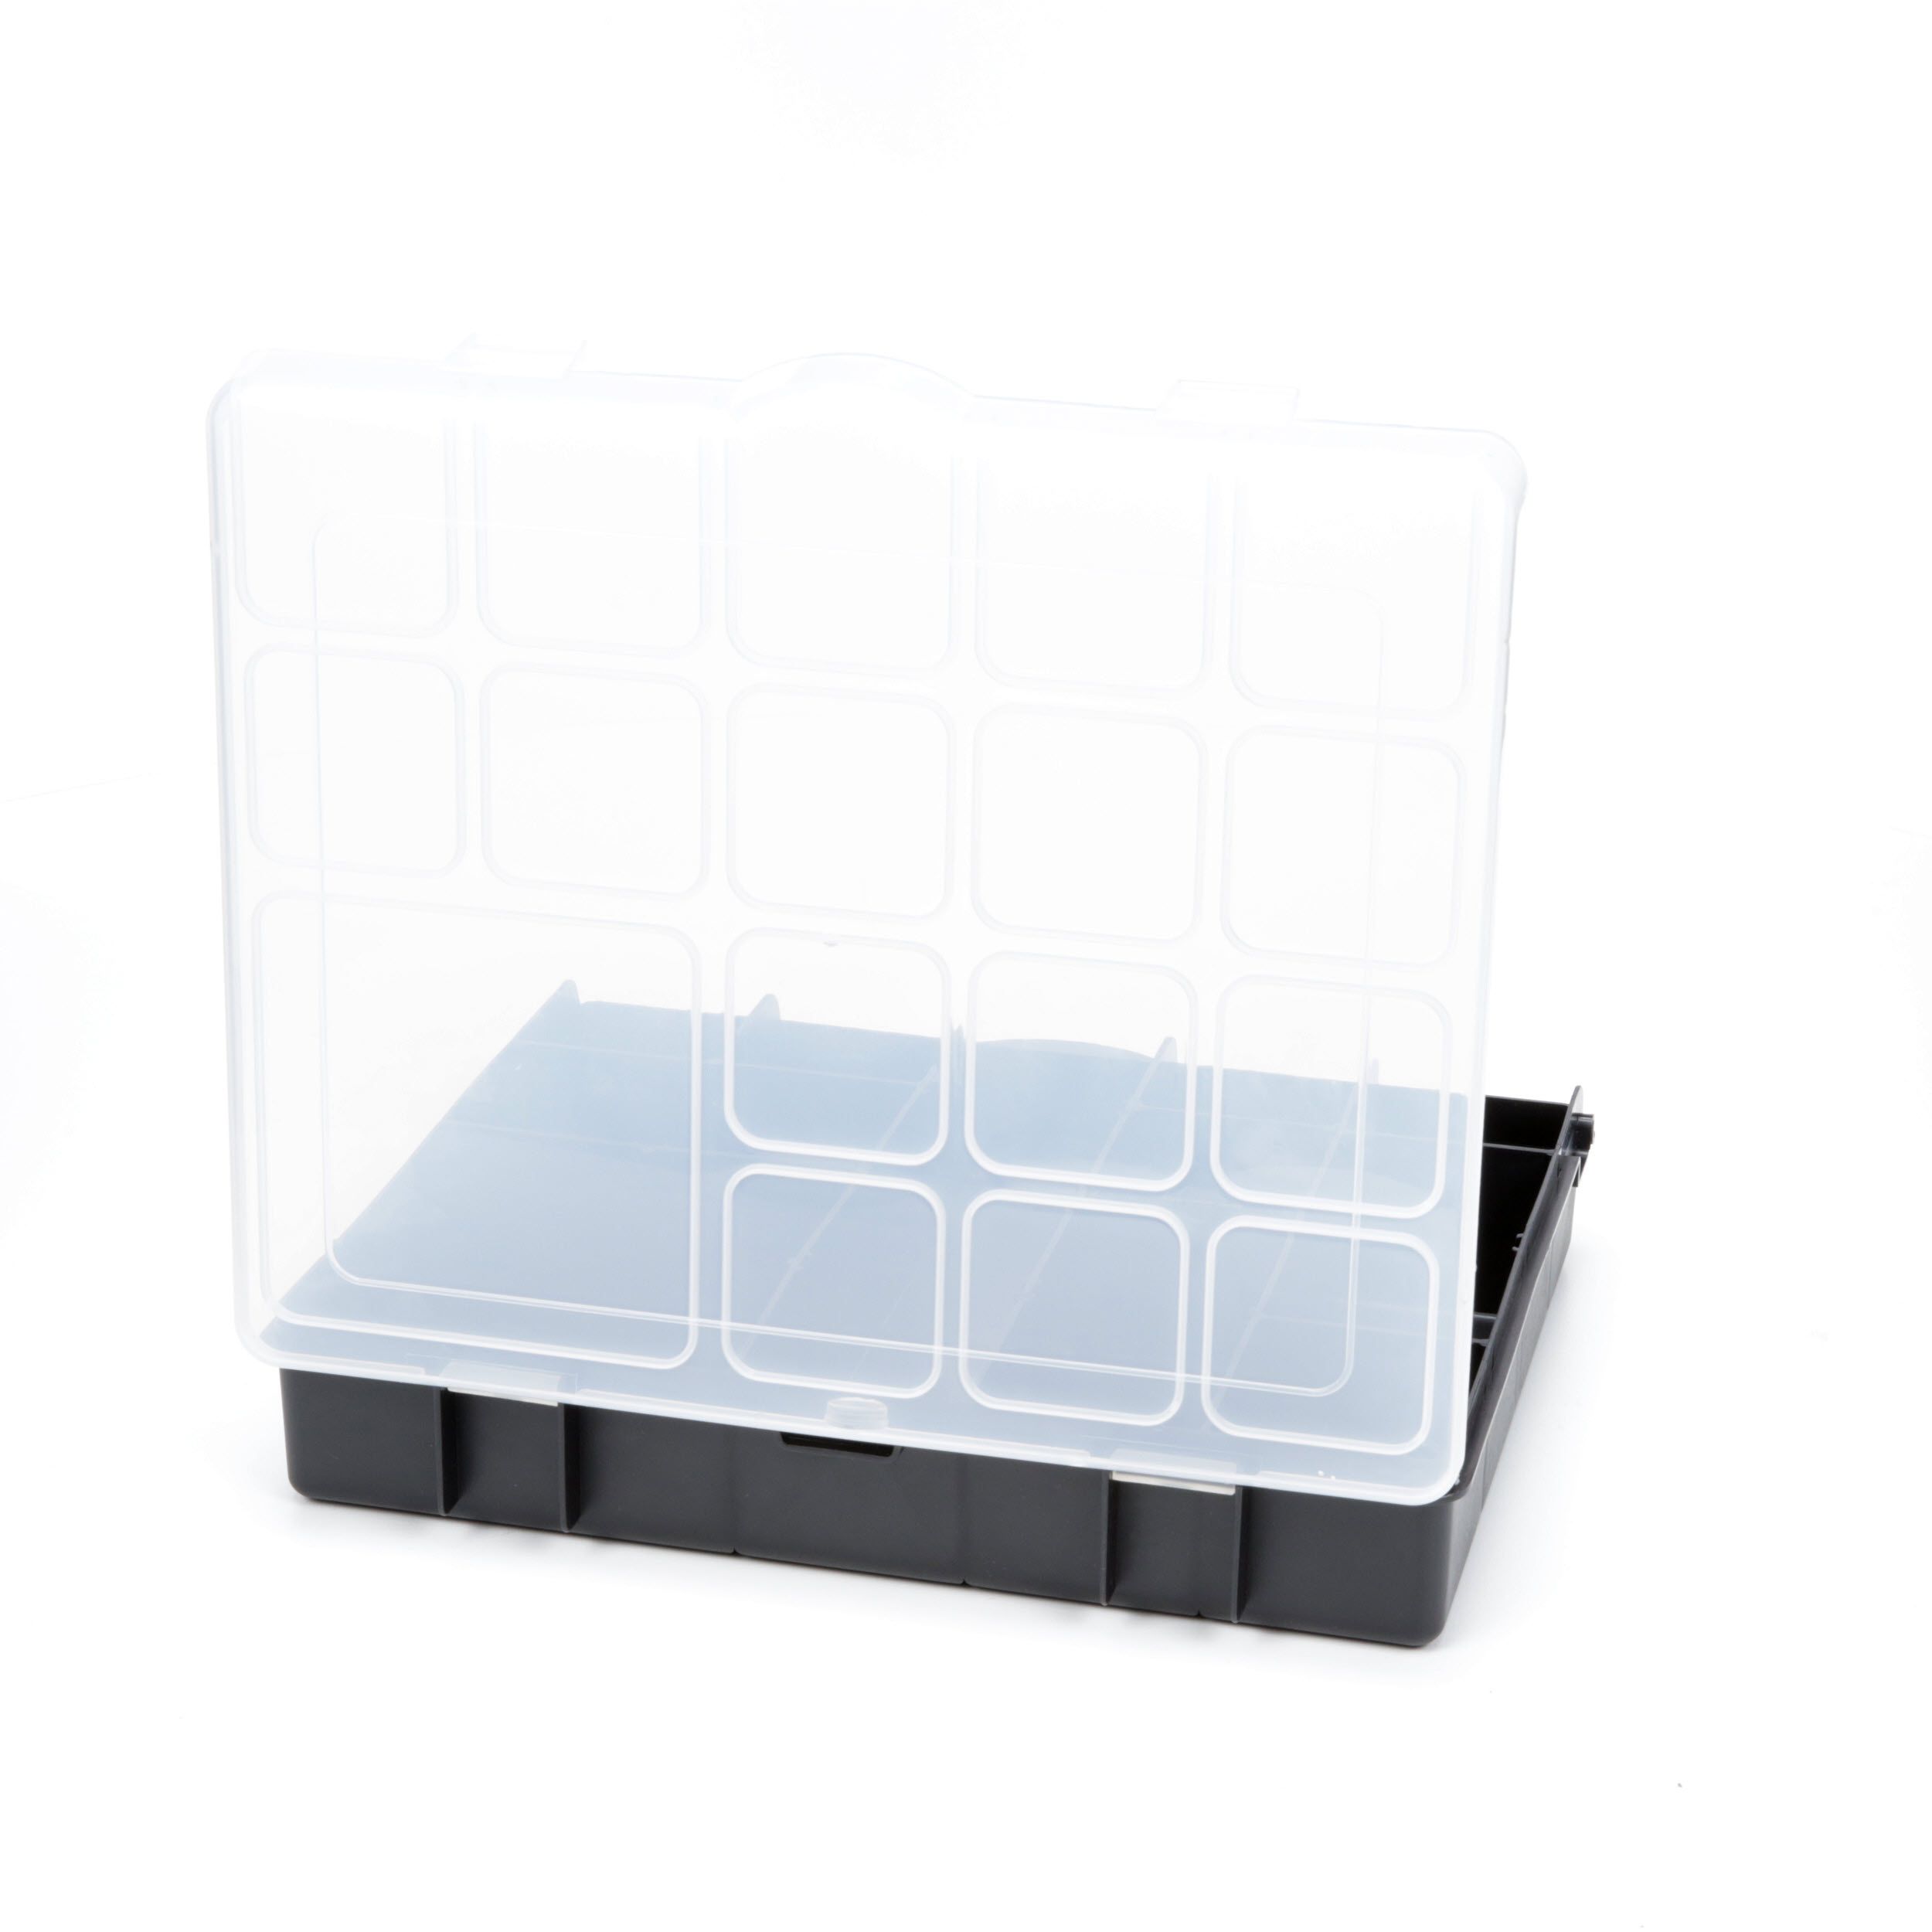 2 x 6 Compartment Parts Organizer 4.25" x 8.25" Clear Storage Divided Box 